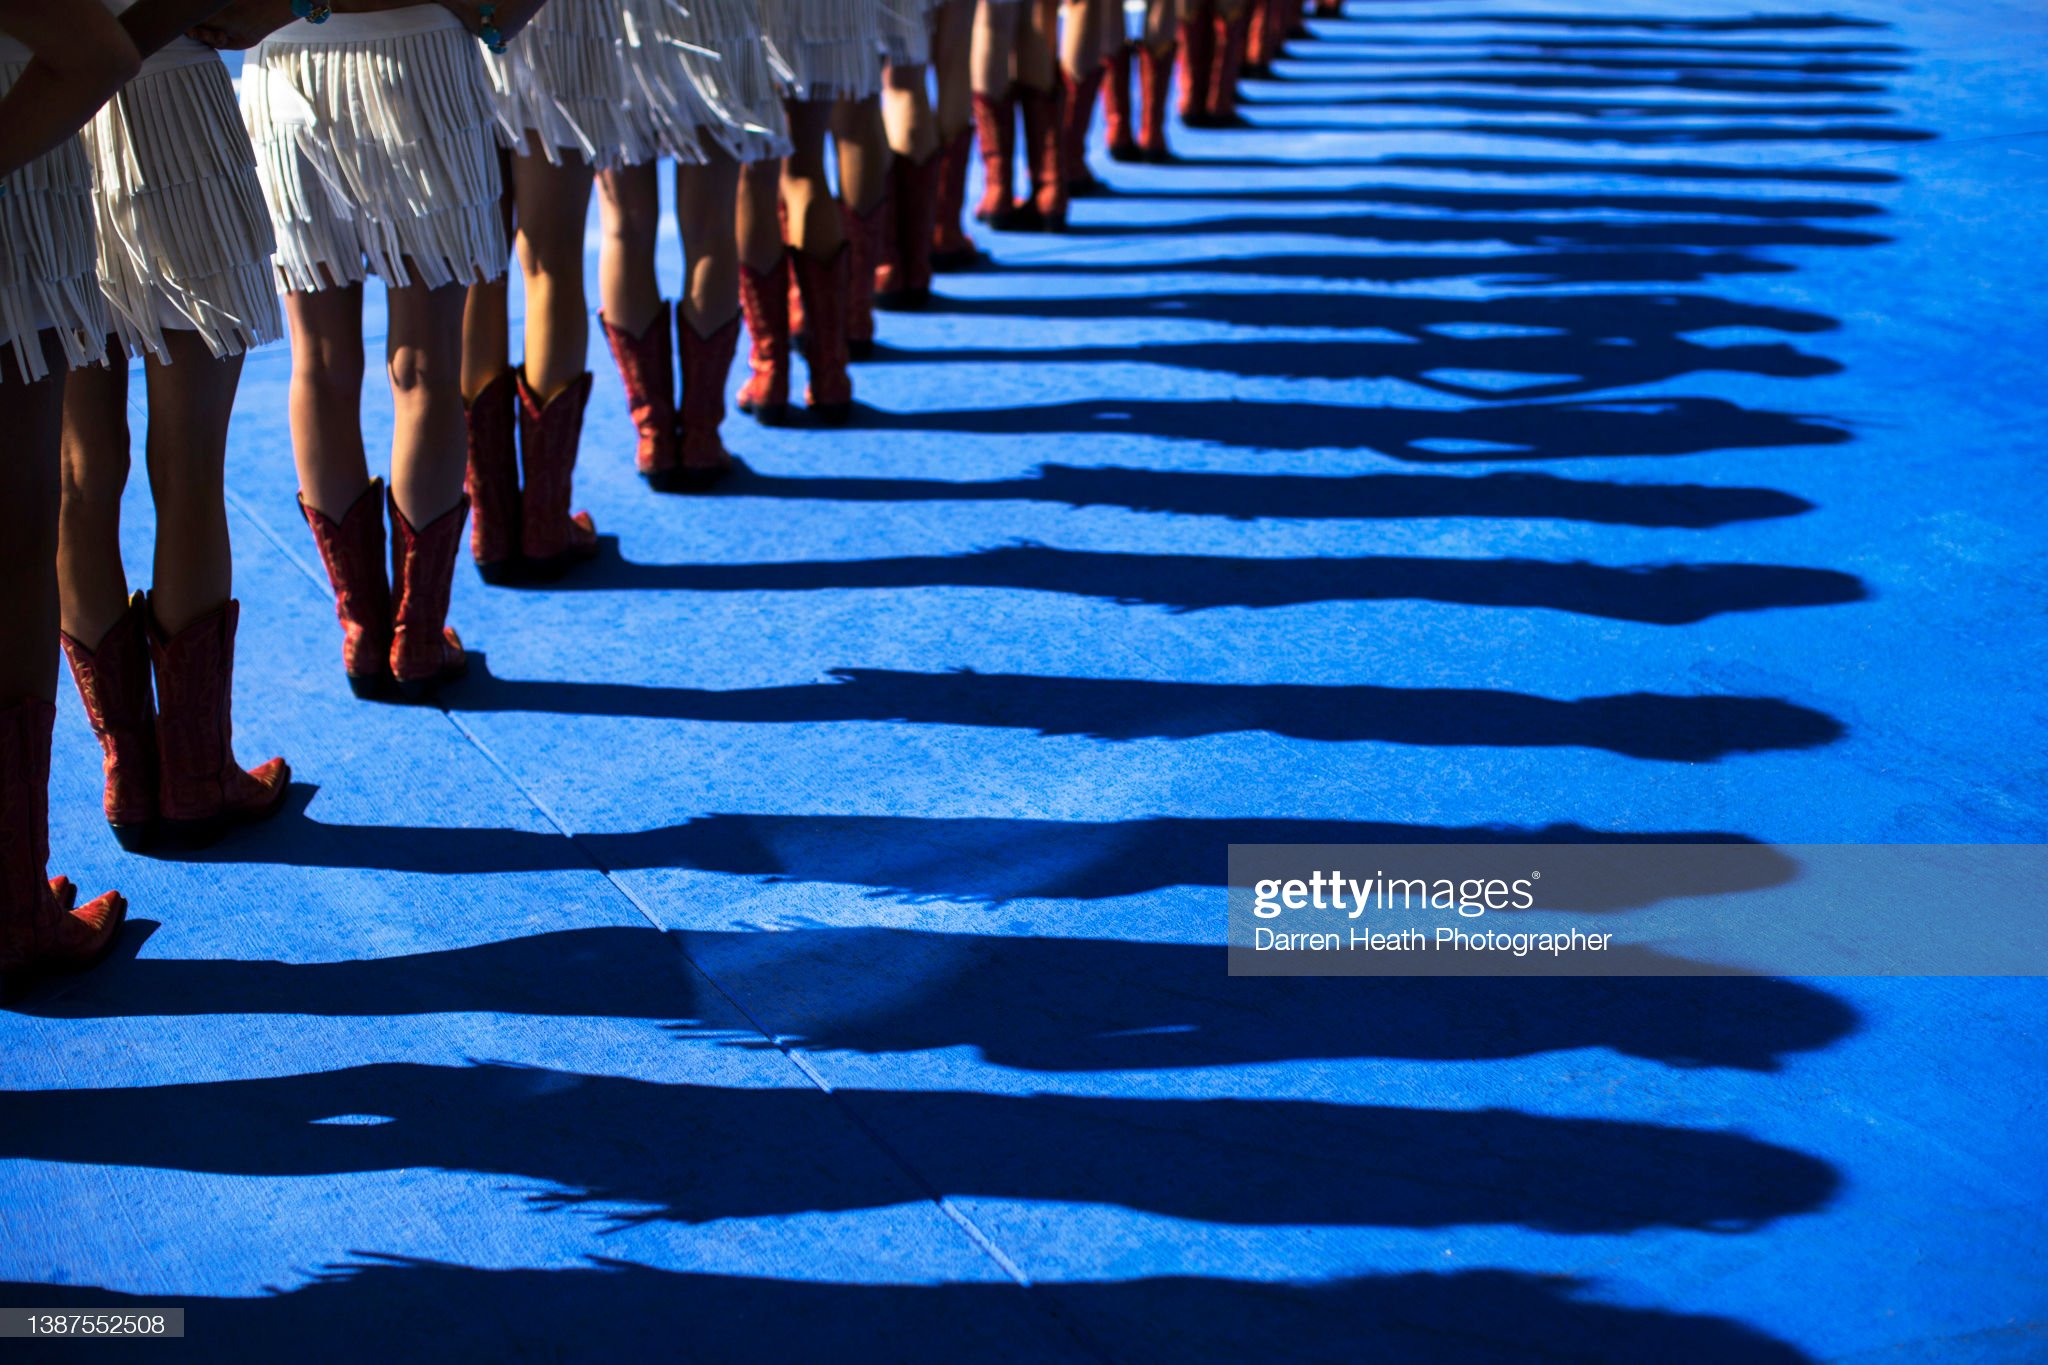 The shadows thrown by cowgirl outfit and cowboy boots wearing grid girls standing in a line in the pit lane during the Formula One drivers' parade at the 2013 United States Grand Prix.